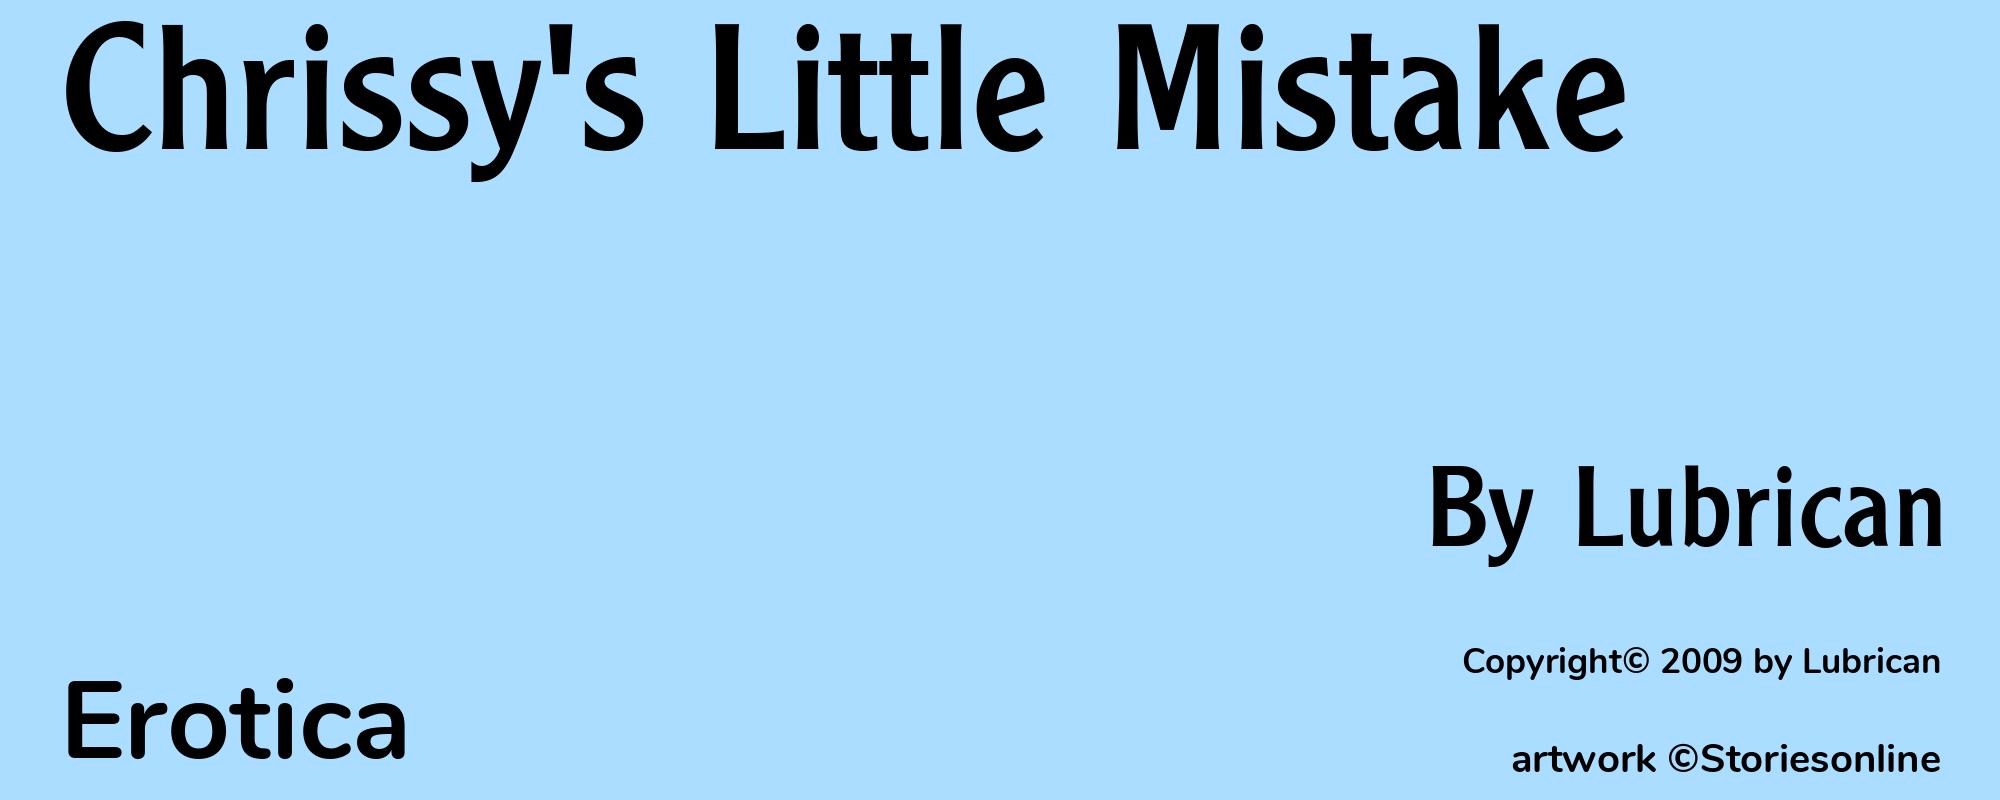 Chrissy's Little Mistake - Cover